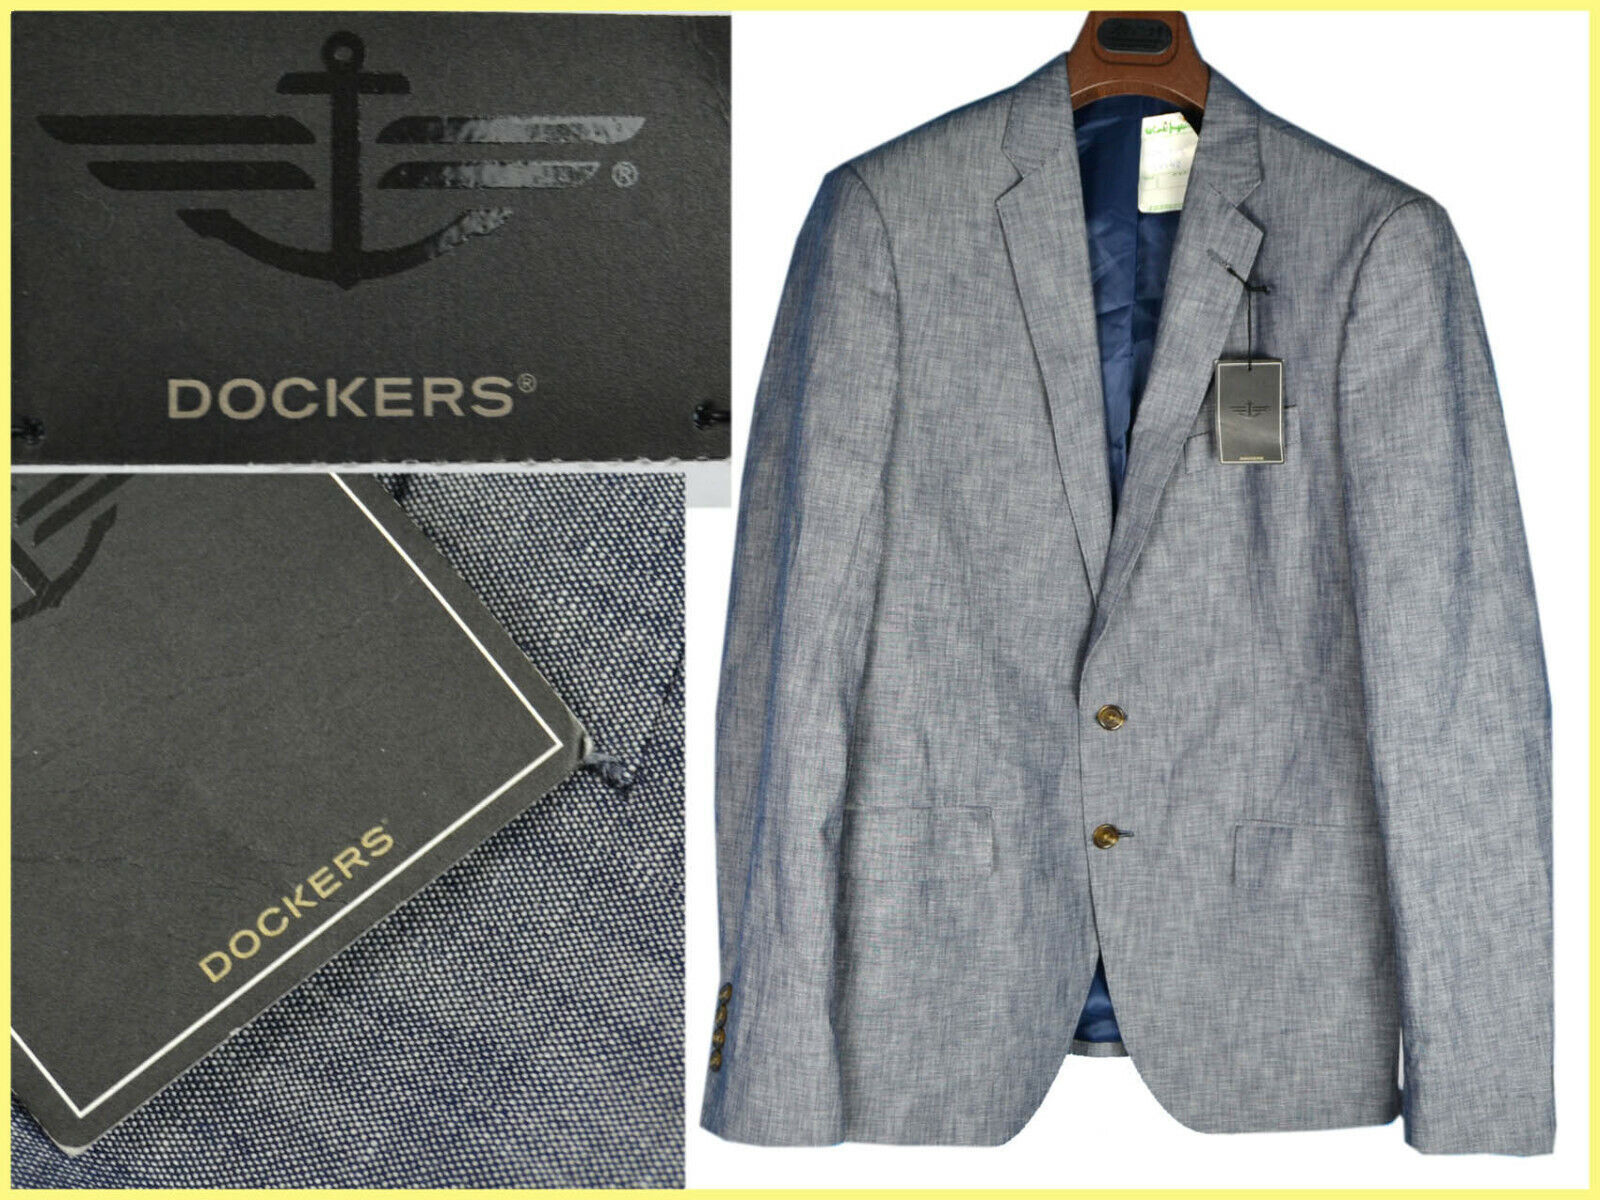 Primary image for DOCKERS Jacket Man 52 EU / 42 UK / 42 US *DISCOUNT HERE* DO12 T2P